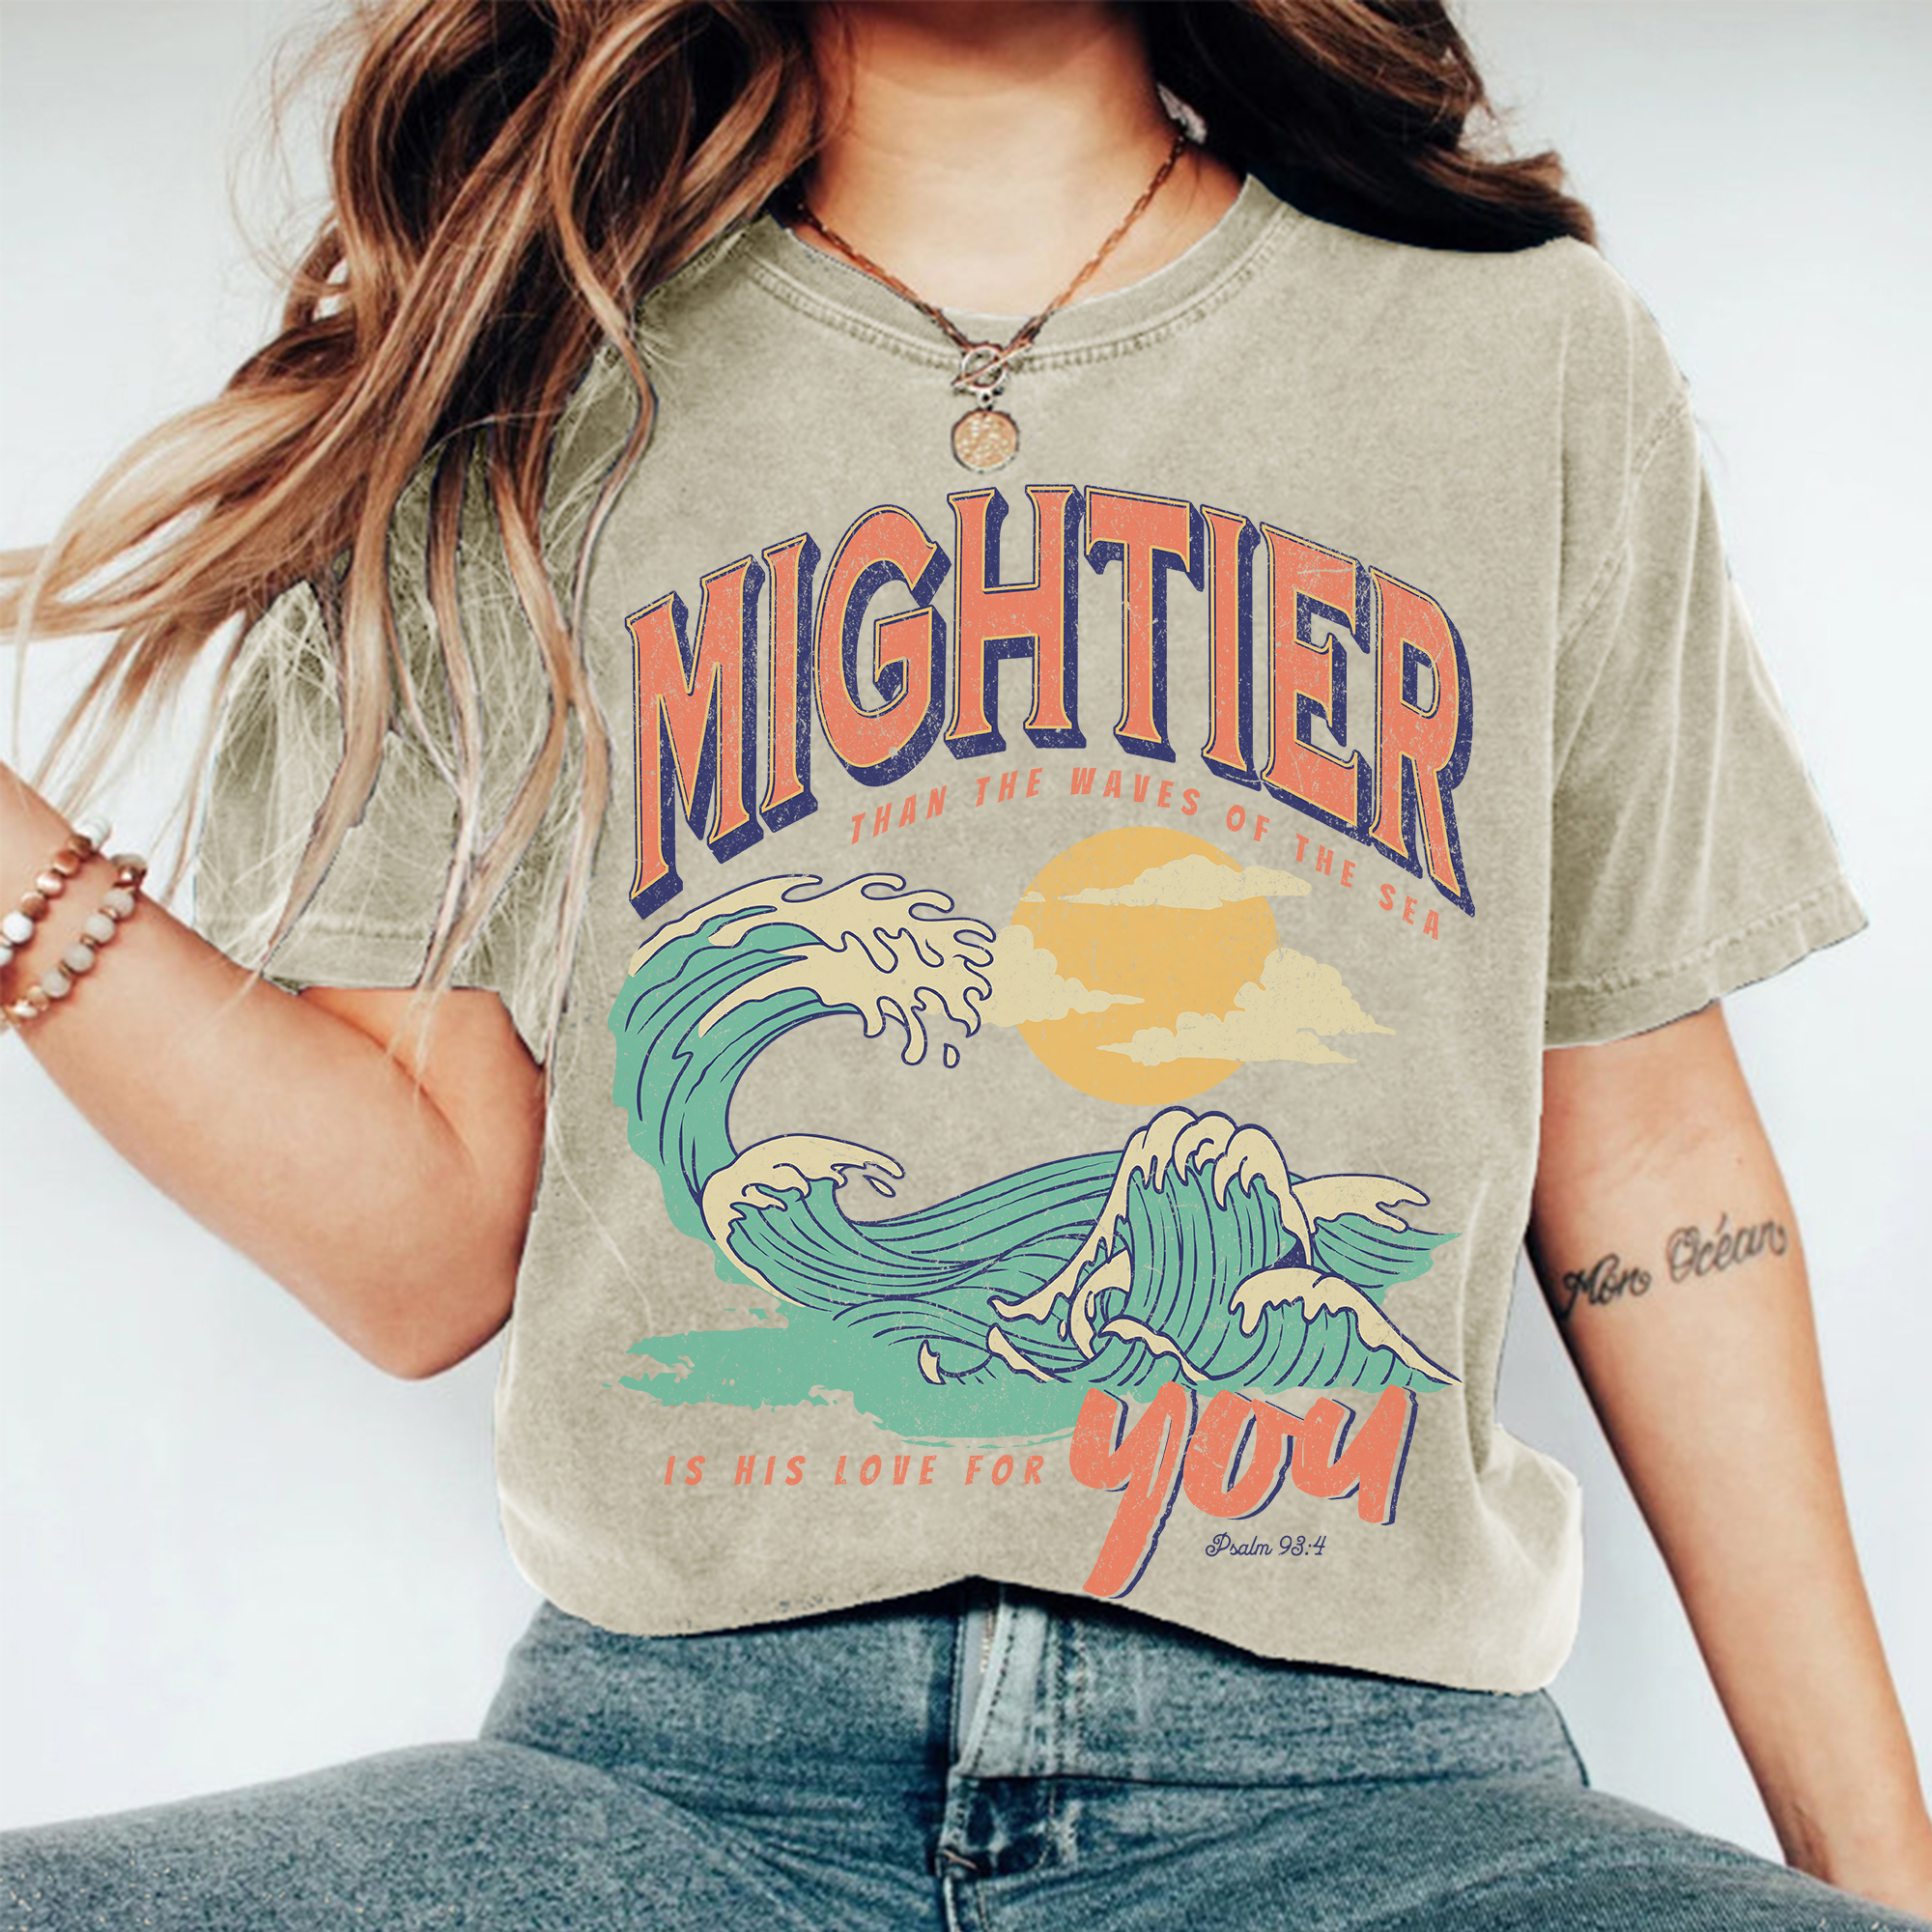 mightier than the waves of the sea is his love for you T-Shirt